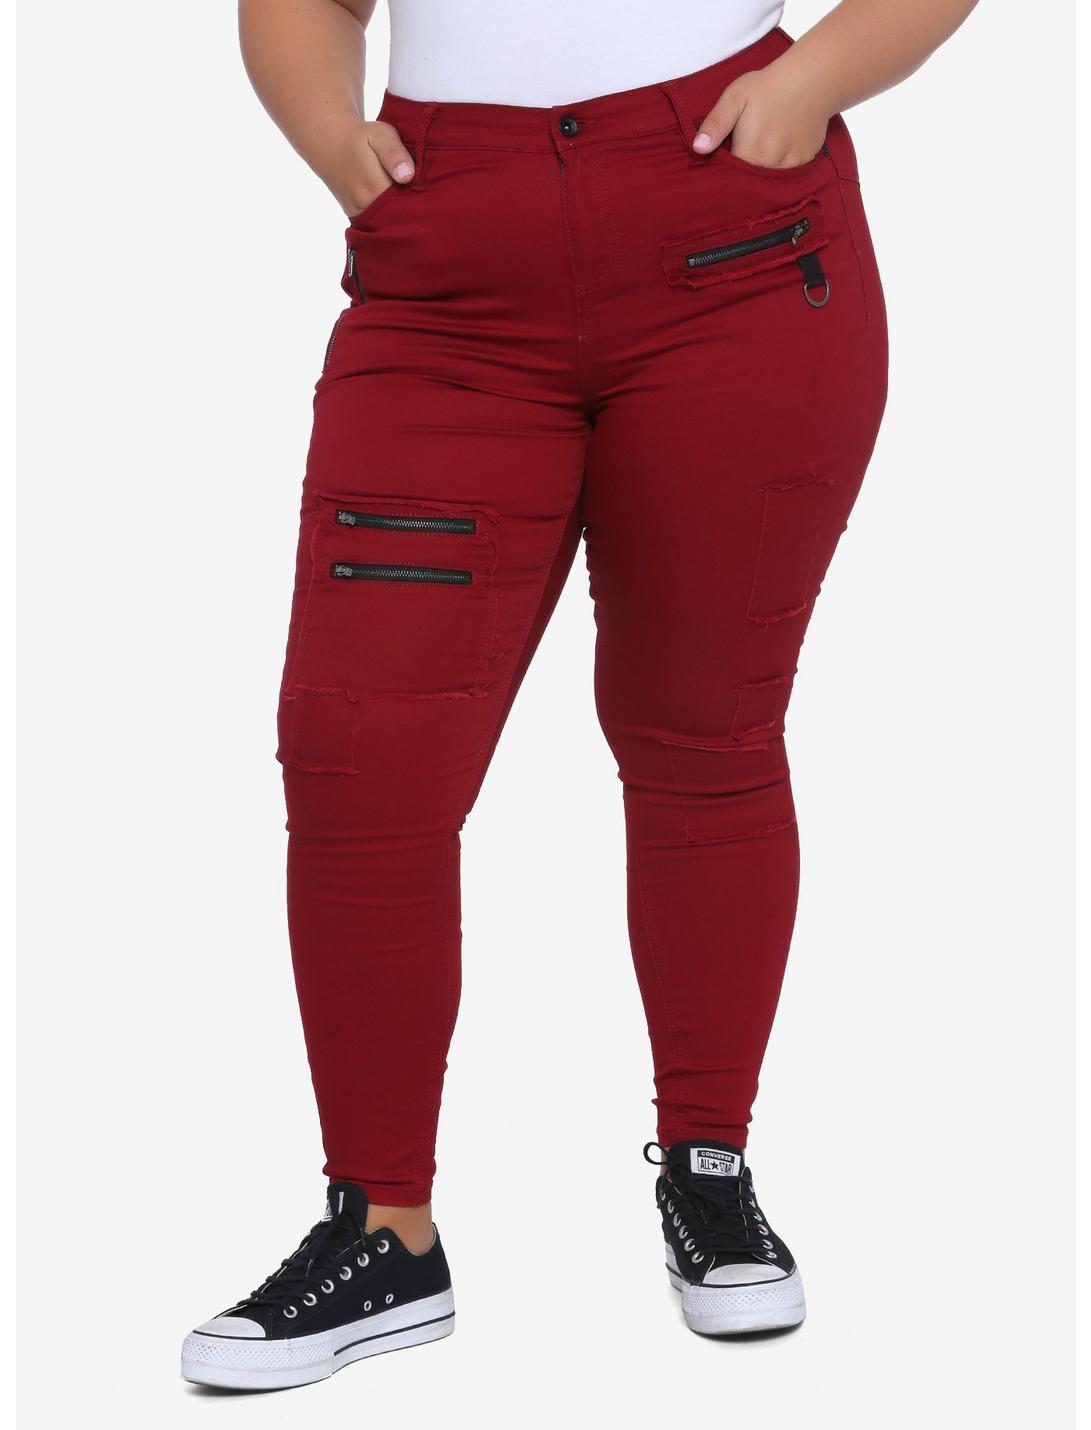 HT Denim Red Patches & Zippers Hi-Rise Super Skinny Plus Size, RED, hi-res